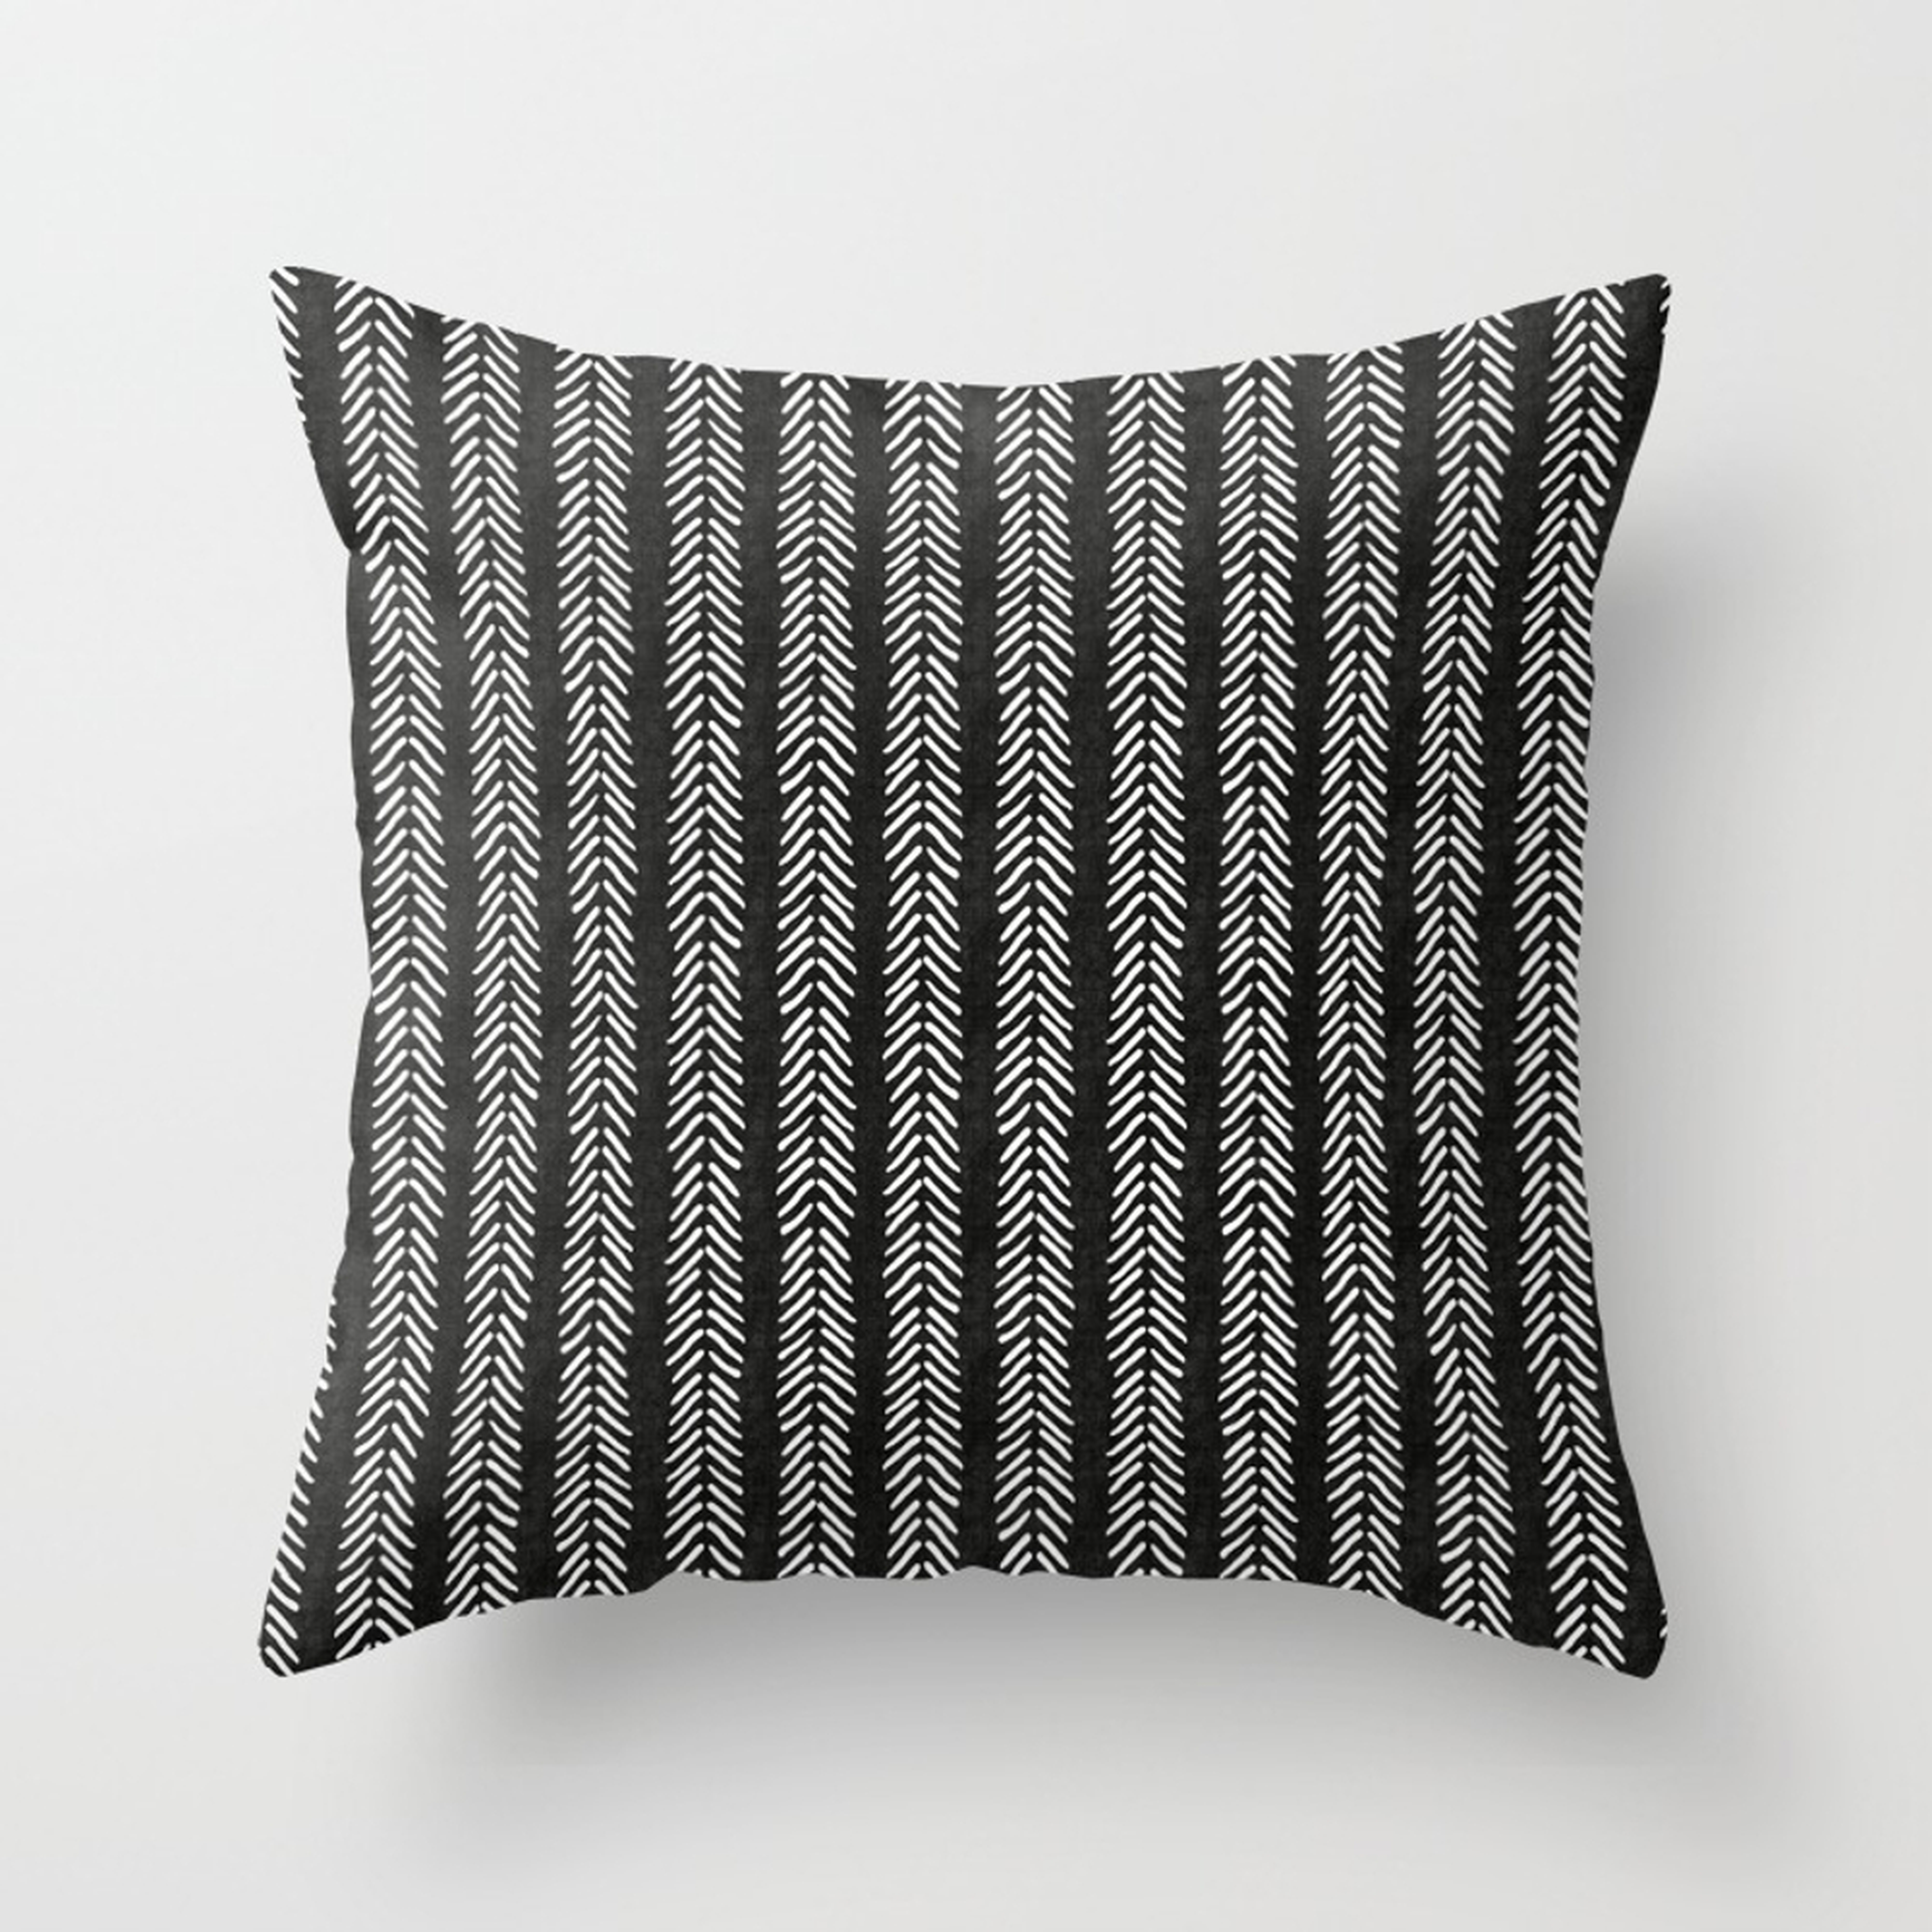 Mud cloth - Black and White Arrowheads Throw Pillow - Indoor Cover (16" x 16") with pillow insert by Beckybailey1 - Society6